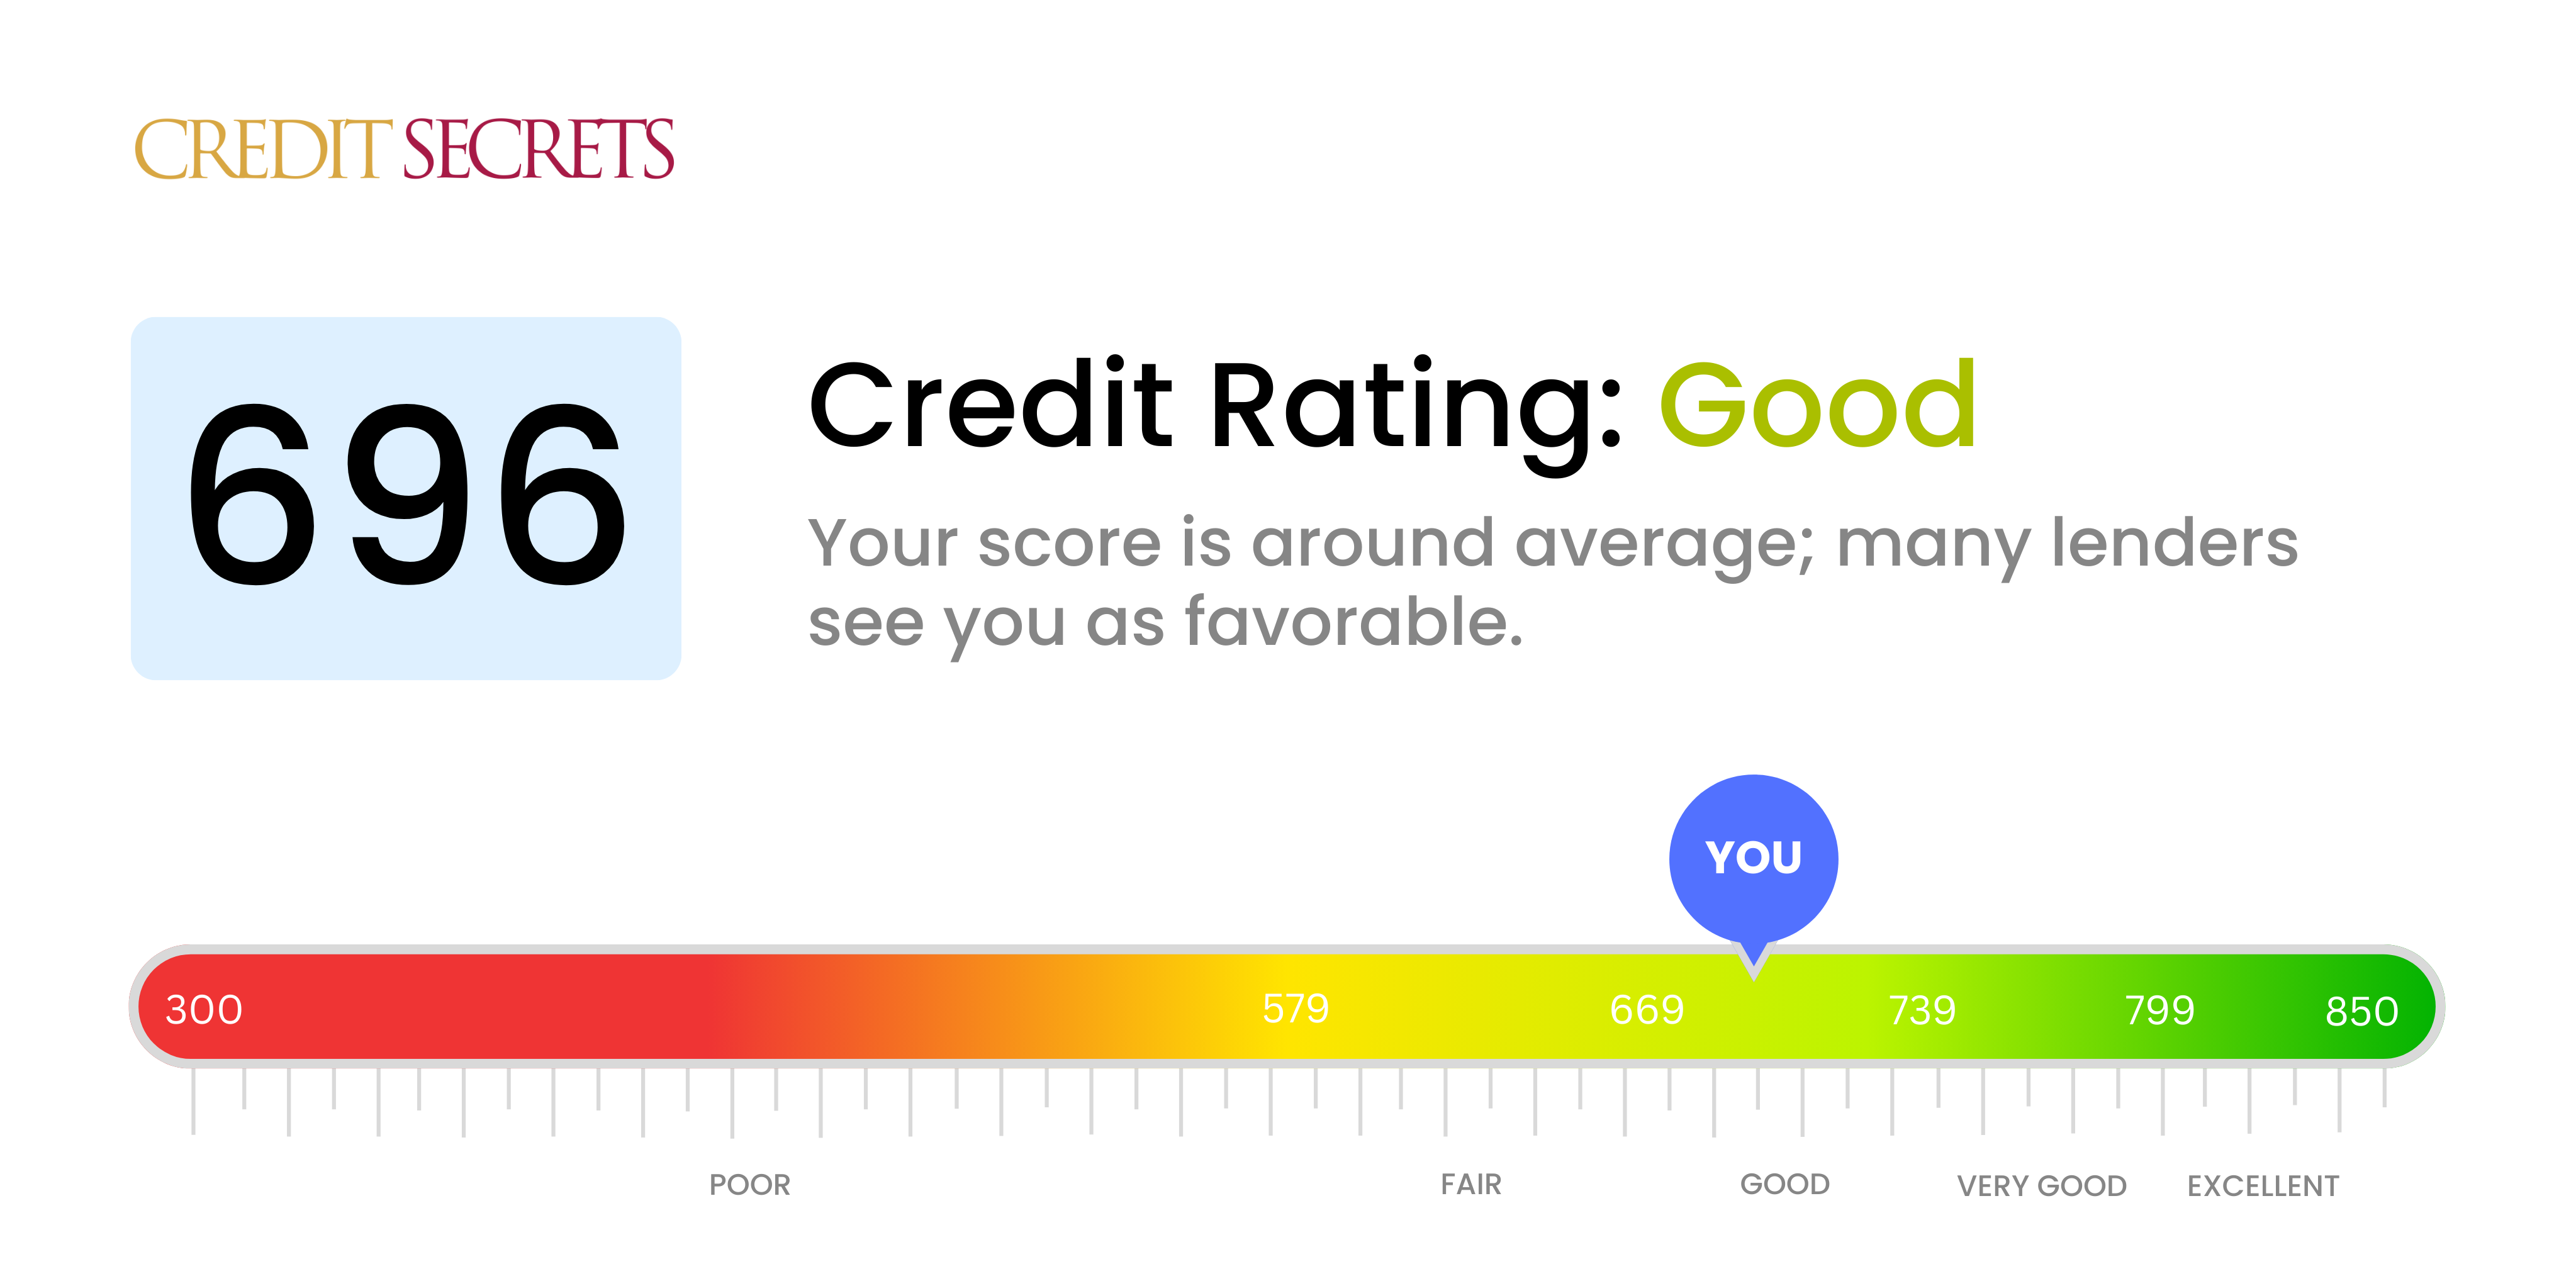 Is 696 a good credit score?